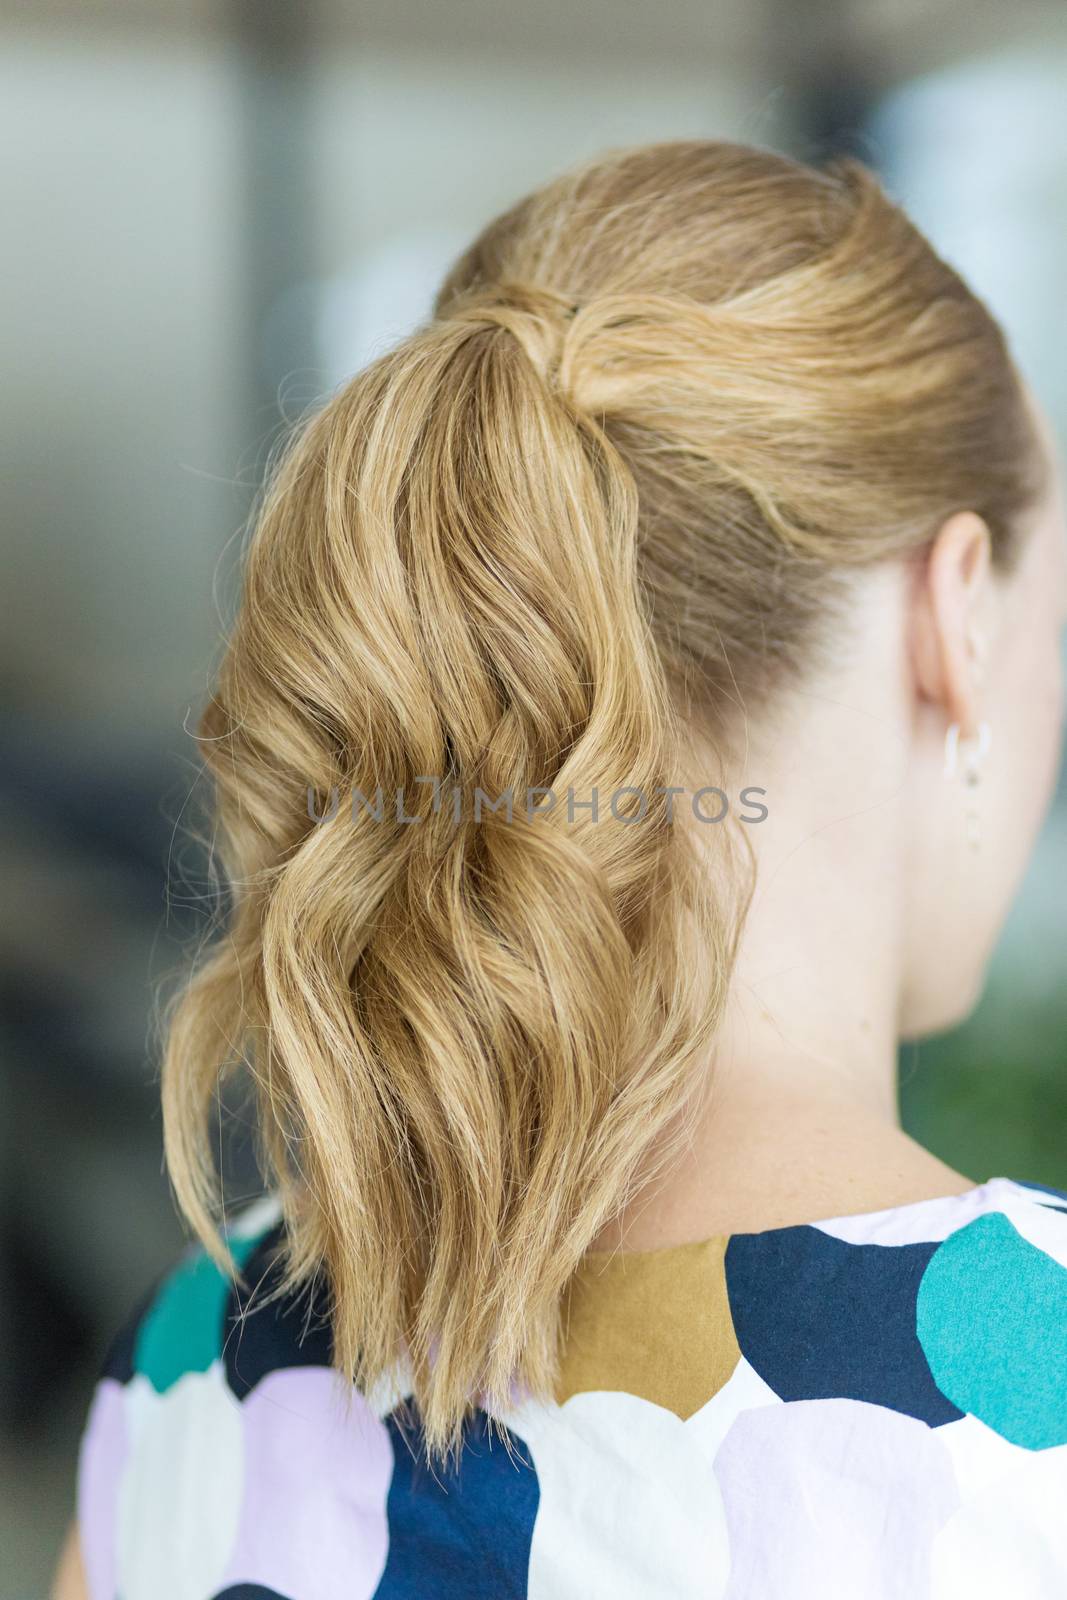 A young woman with long blond wavy hair tied in a ponytail. Back view by galinasharapova